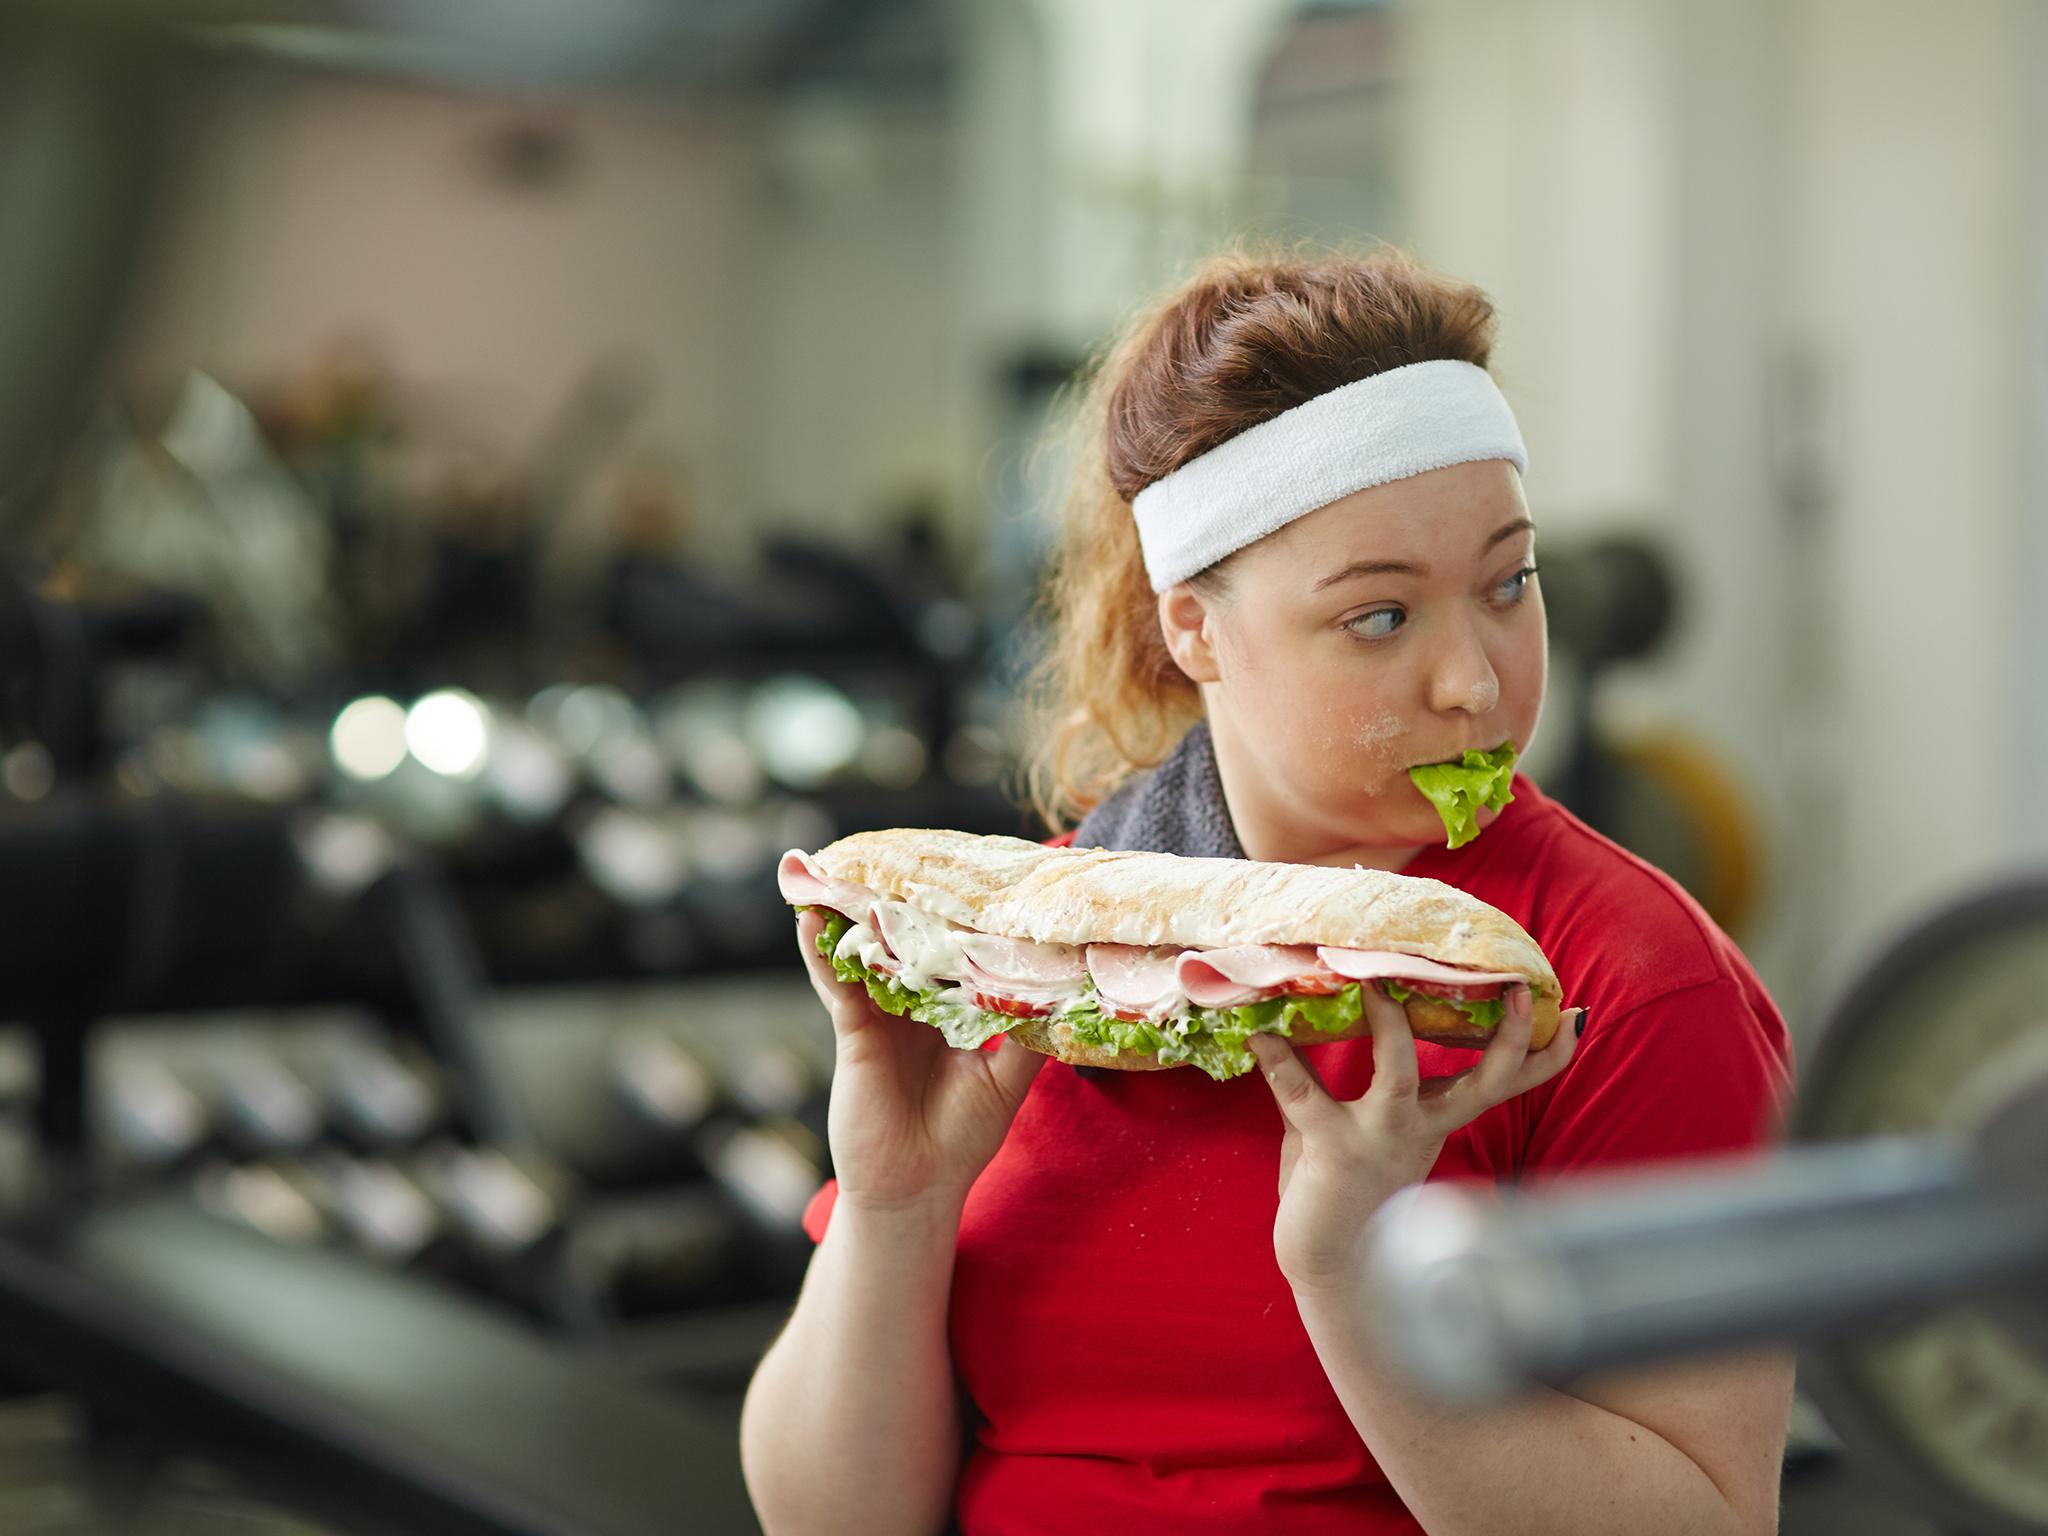 Almost half of respondents admit to fantasising about food and drink while at the gym